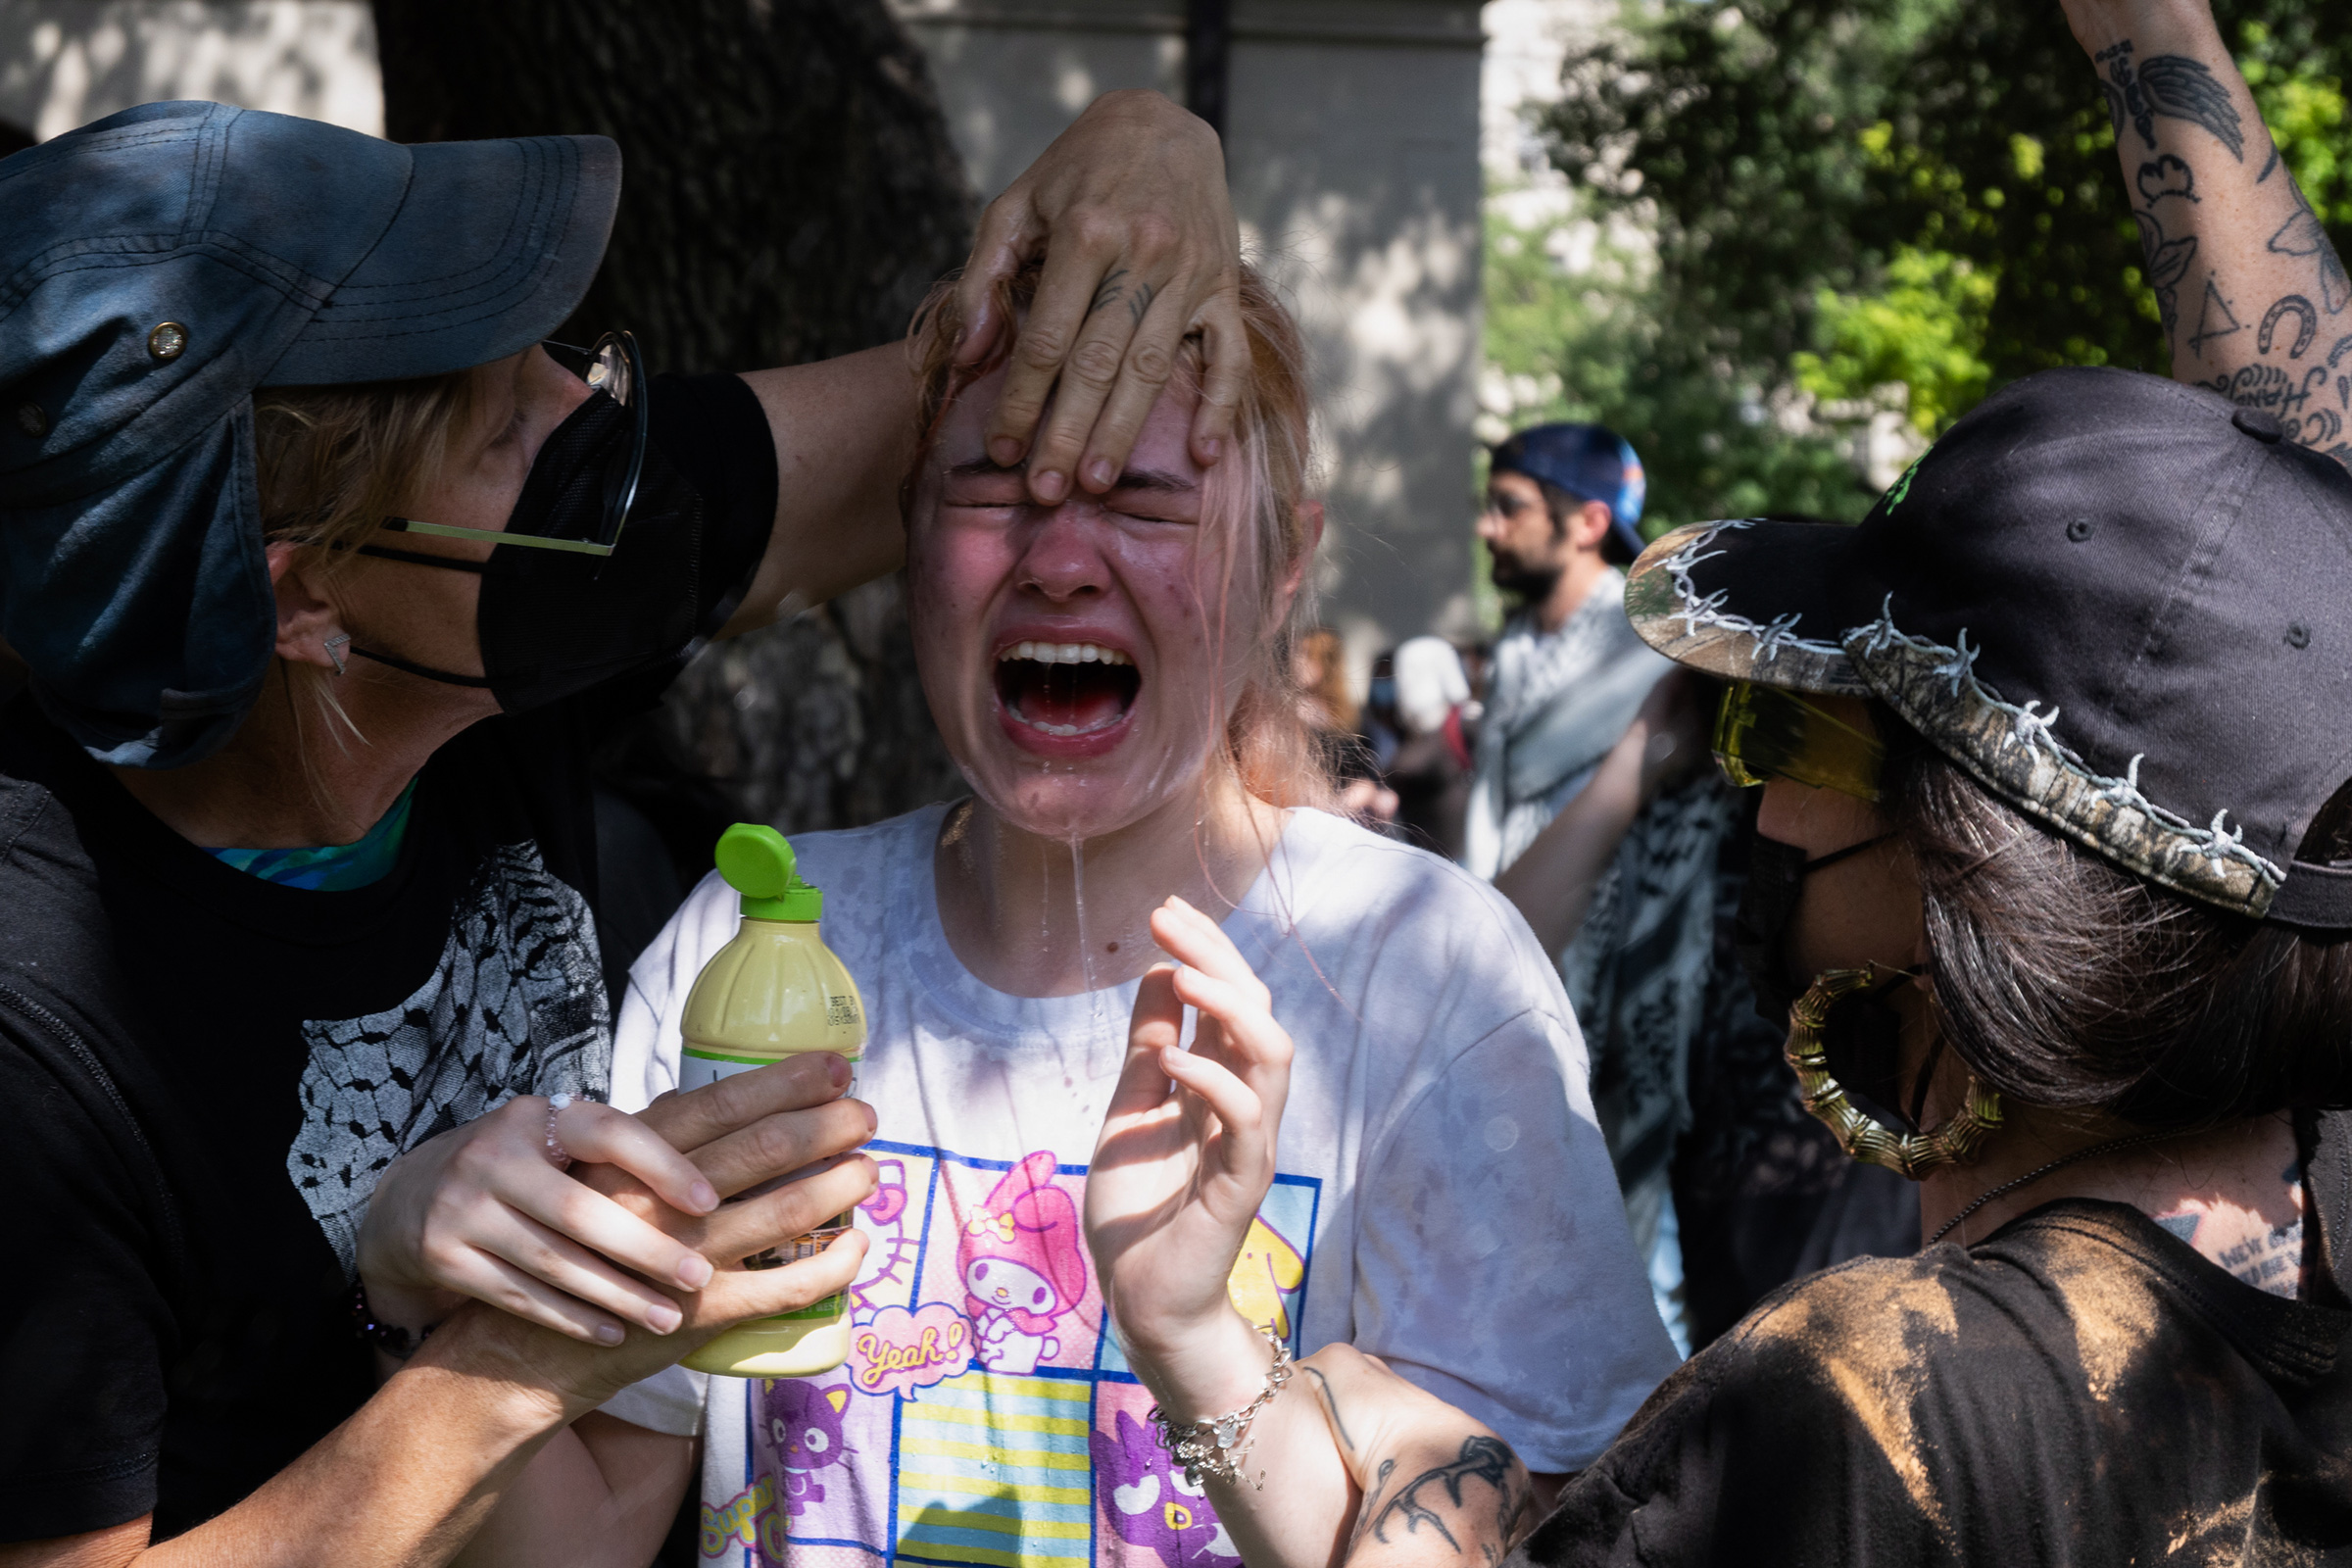 People pour liquid on someone's face to help relieve the pain of getting pepper-sprayed on UT Austin's campus on April 29.